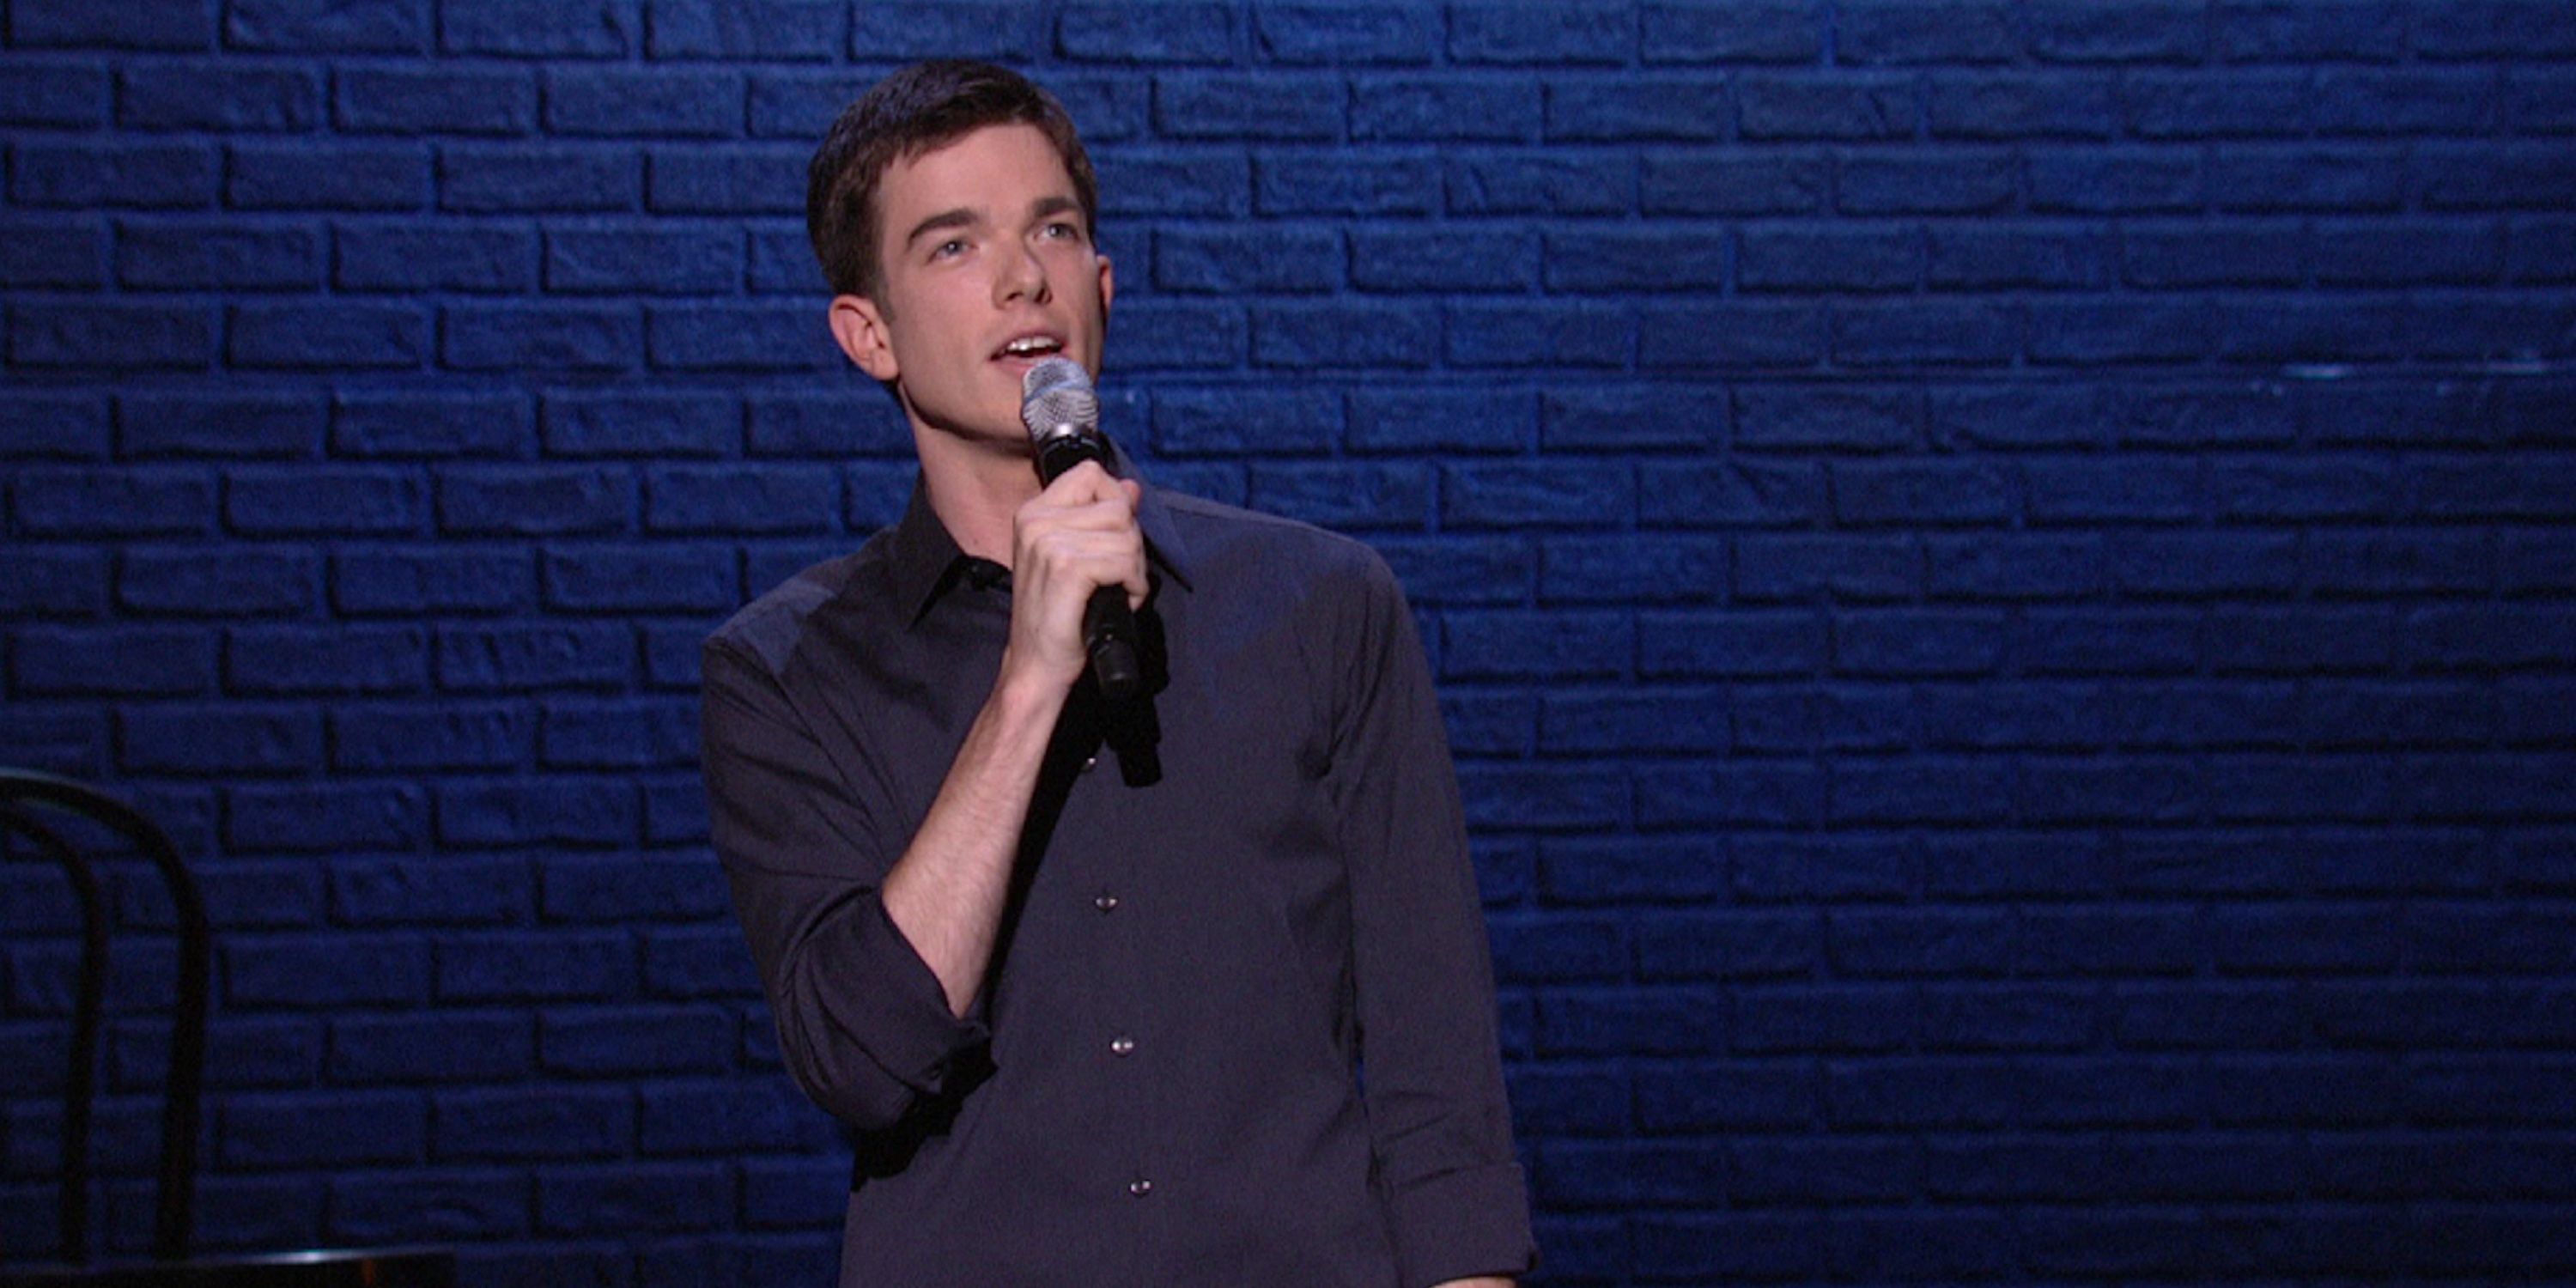 John Mulaney during one of his specials